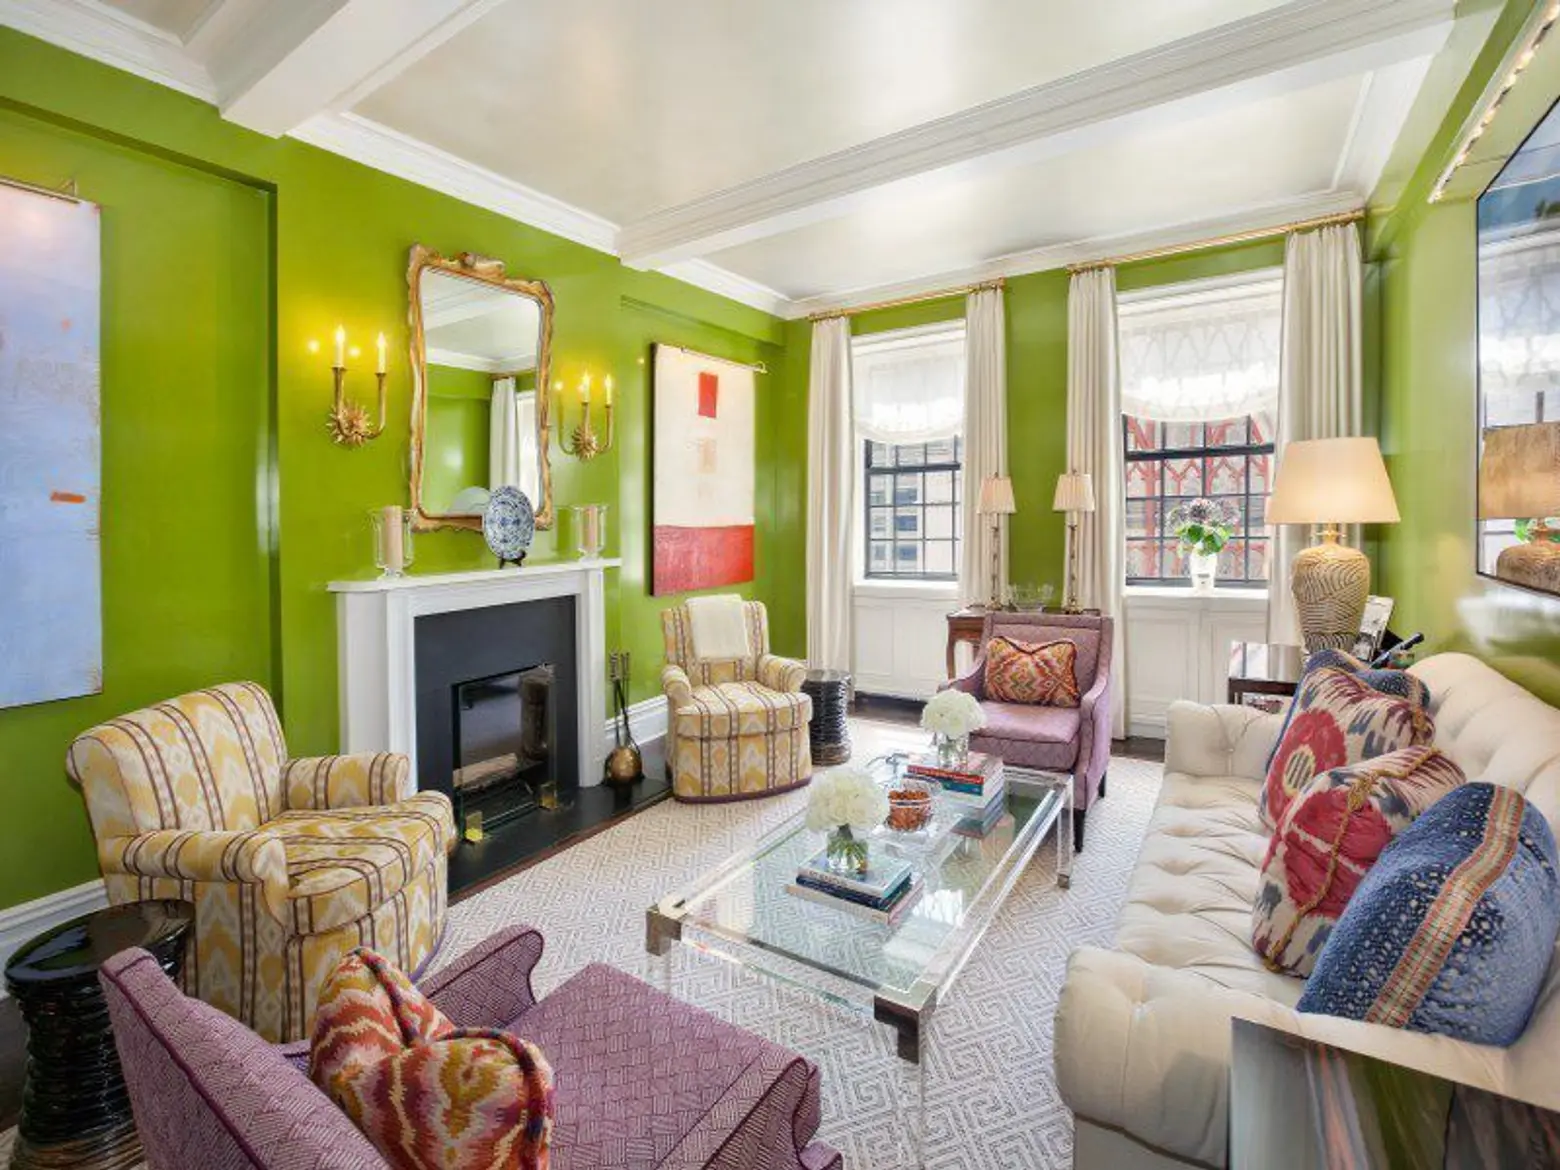 There’s a room for every color of the rainbow in this $5M Upper East Side co-op